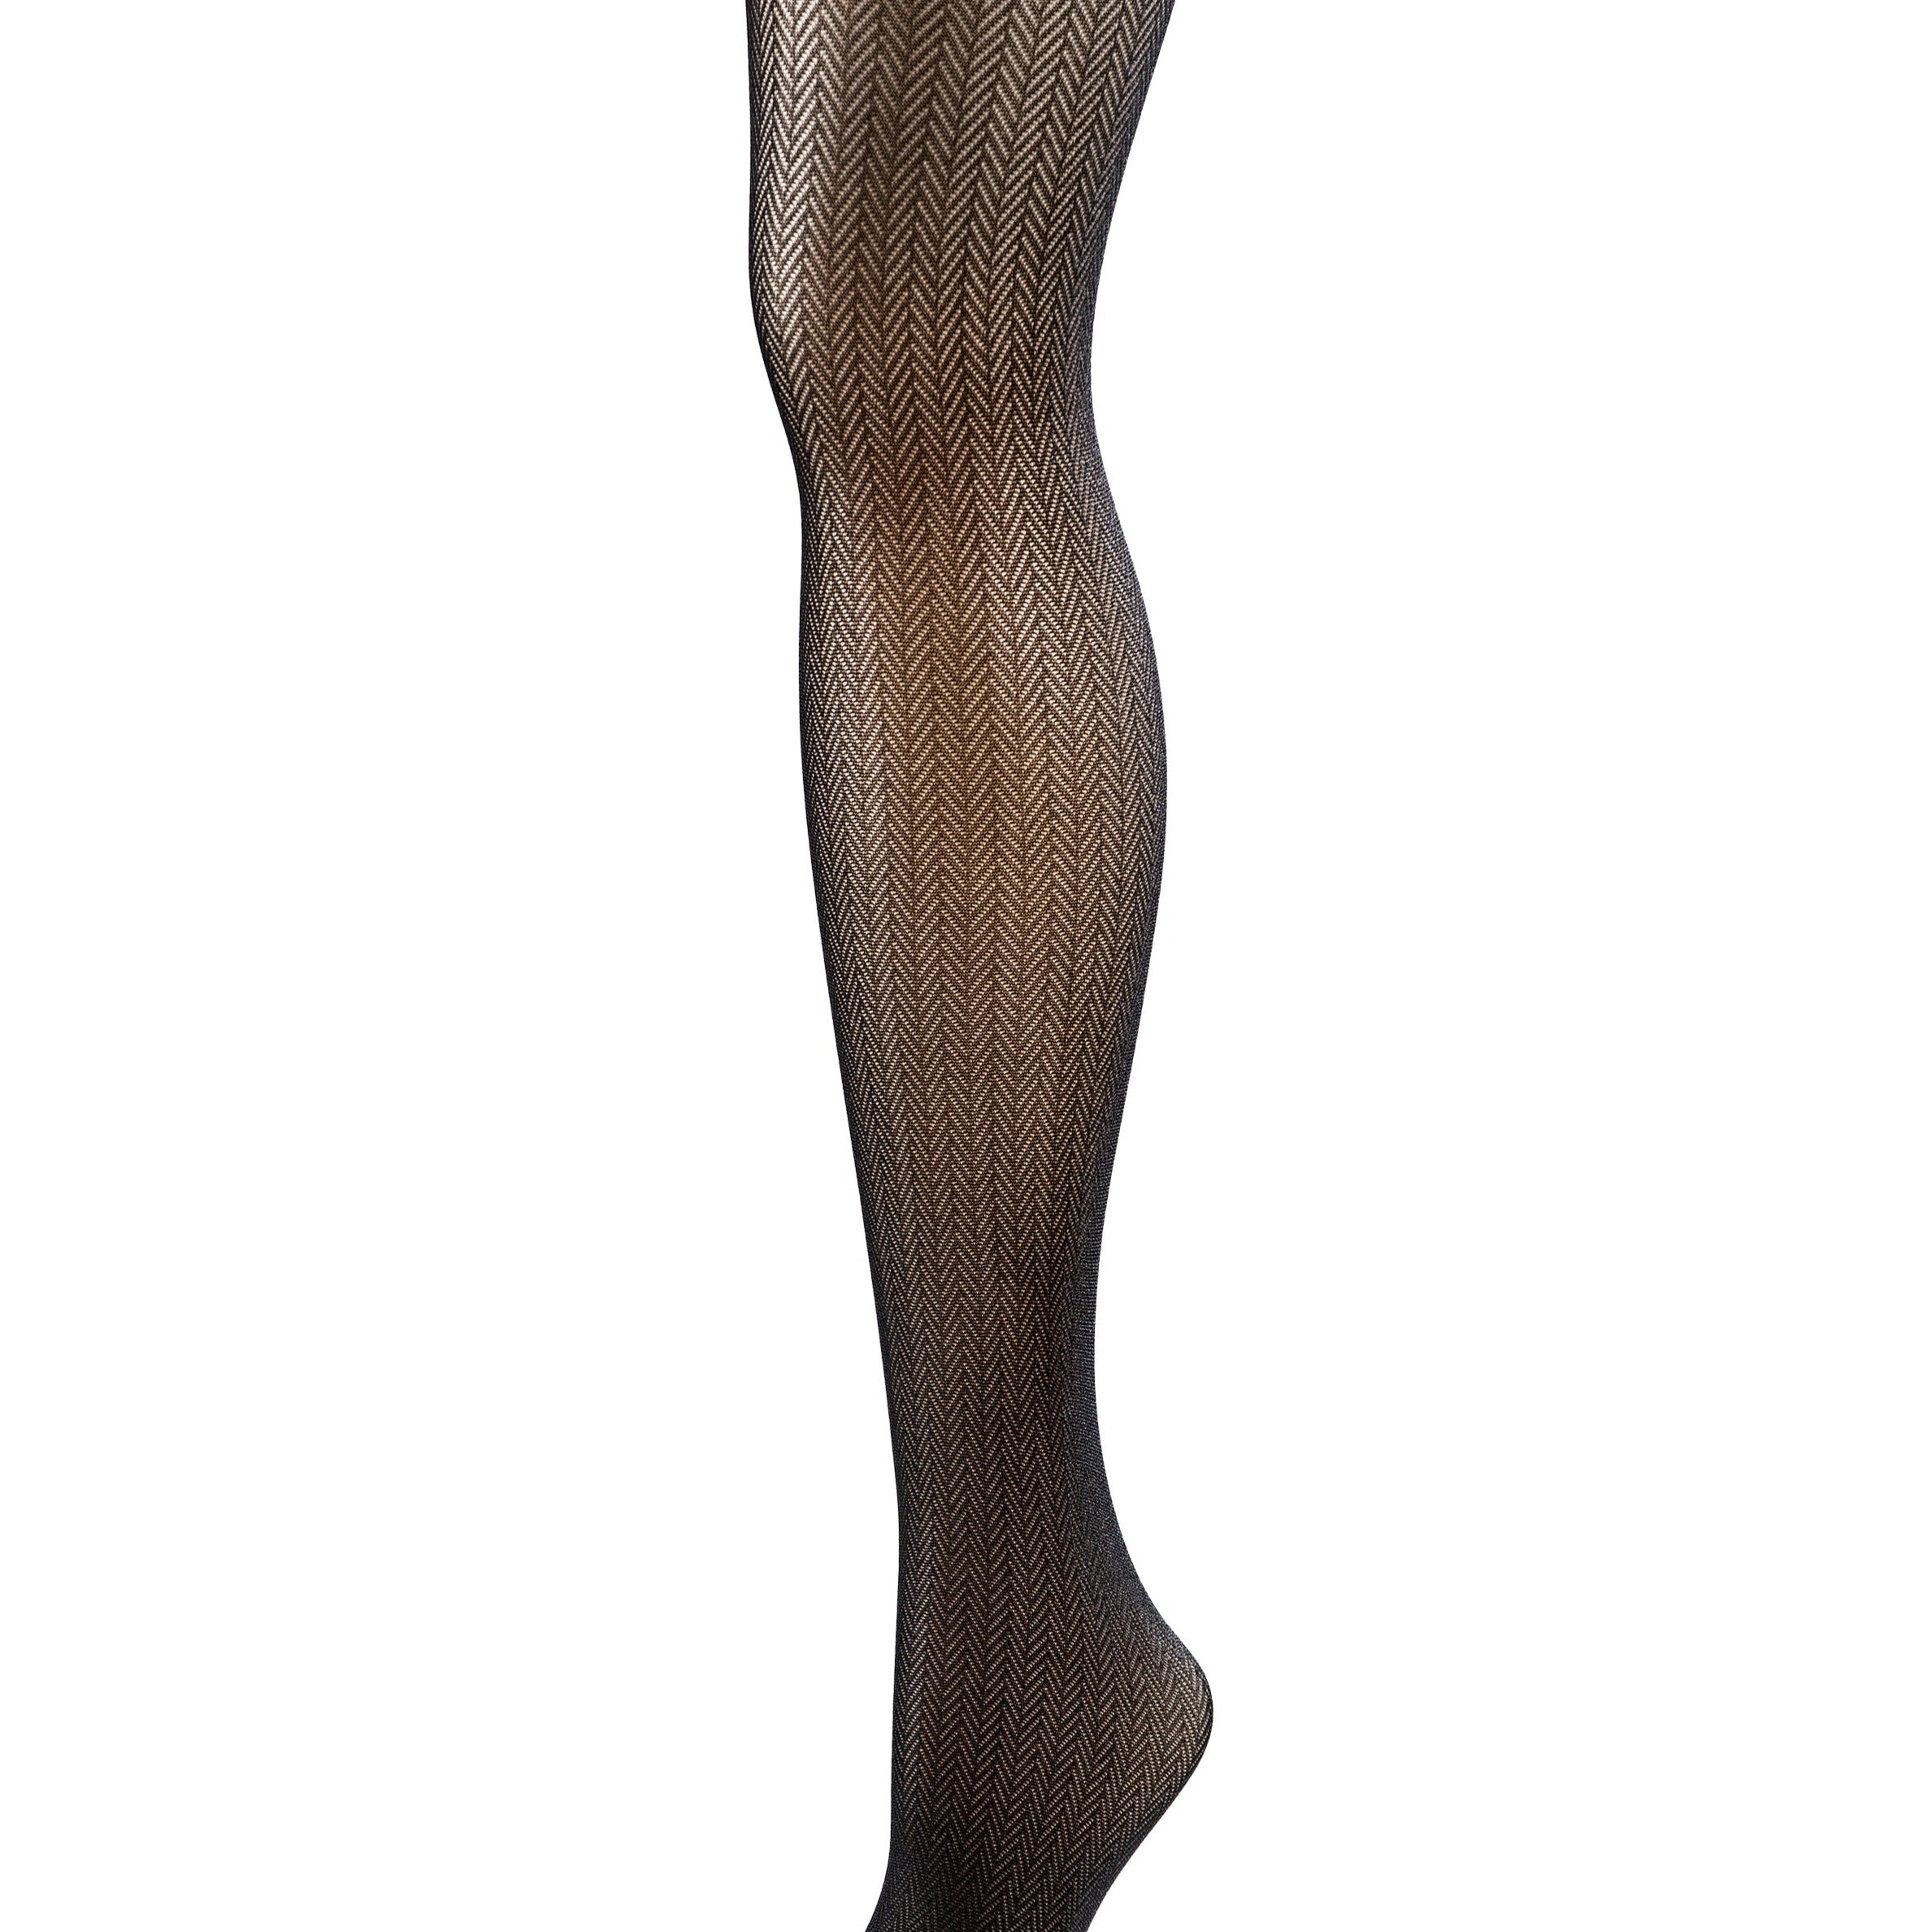 Diane recycled polyamide black tights with herringbone pattern by Miss Lala